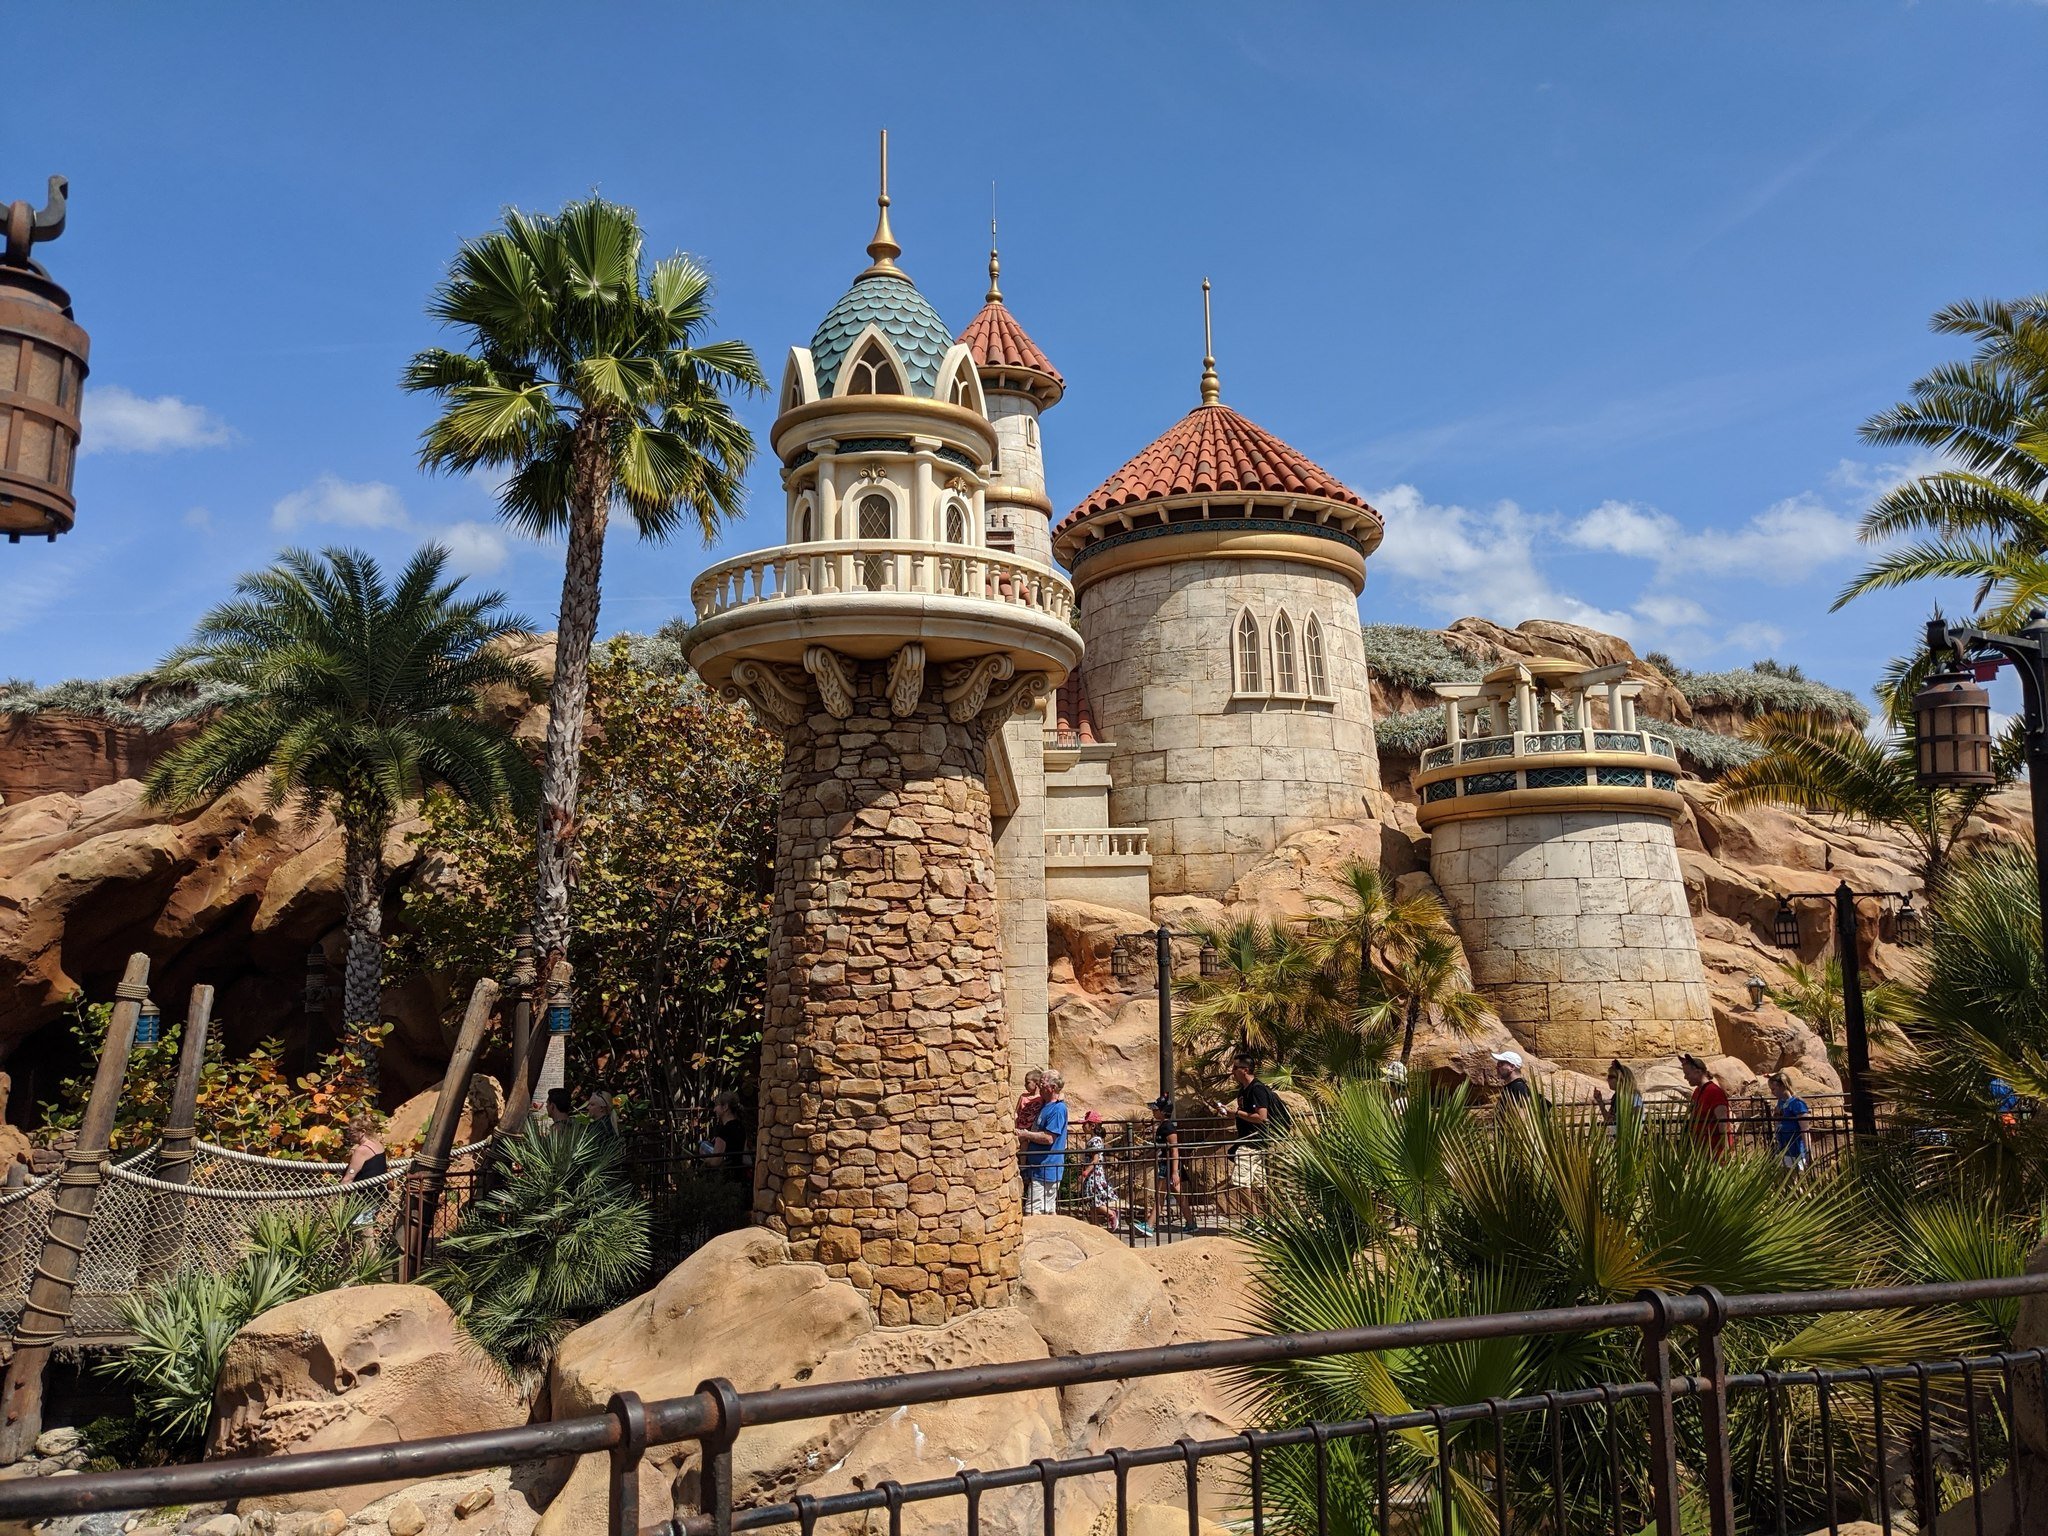 Prince Eric's Castle on the Pixel 4